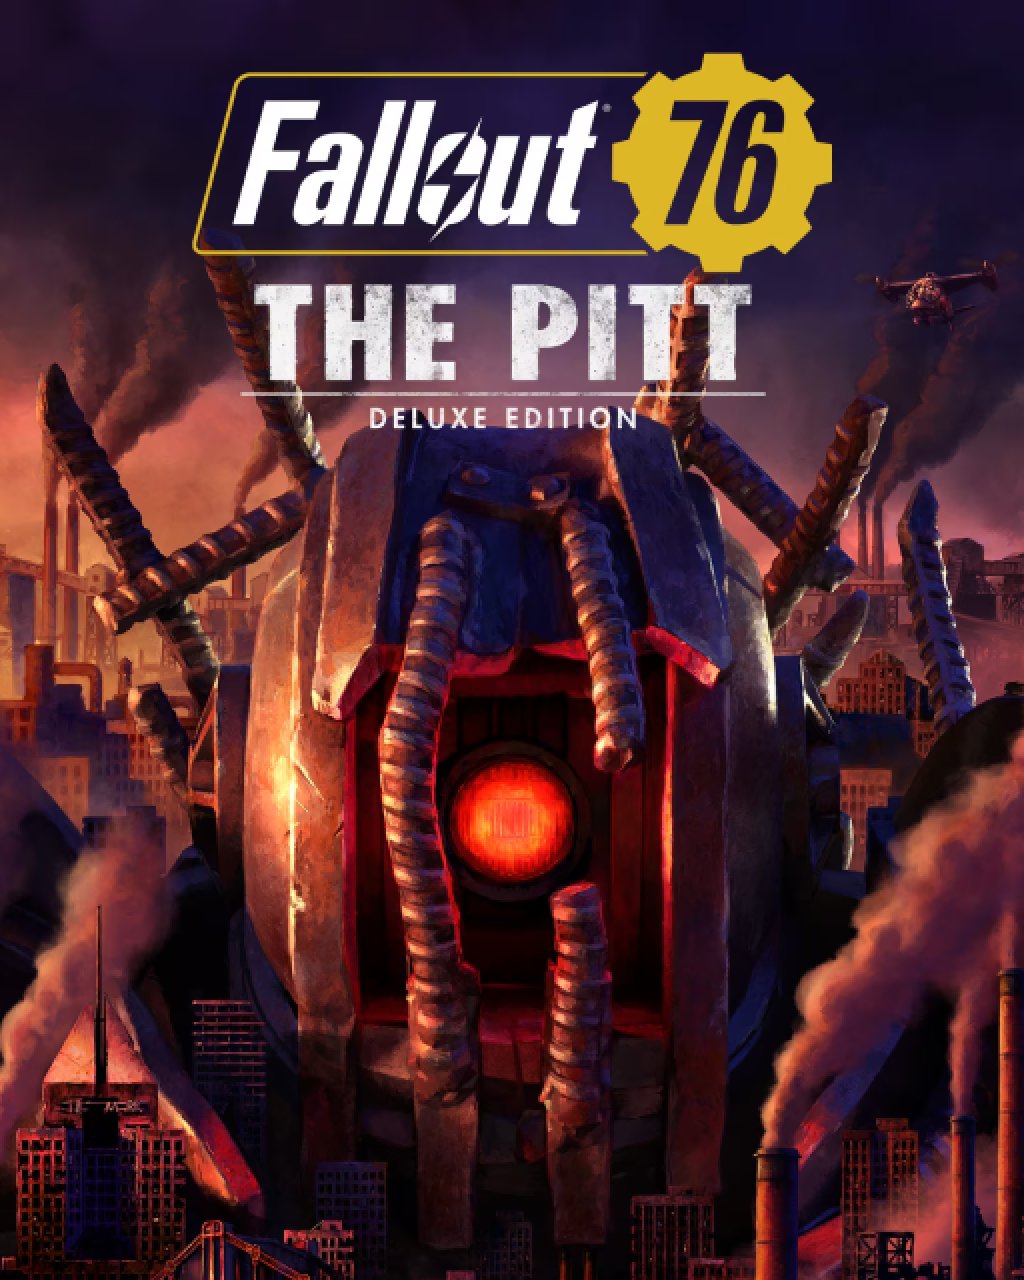 Fallout 76 The Pitt Deluxe Edition